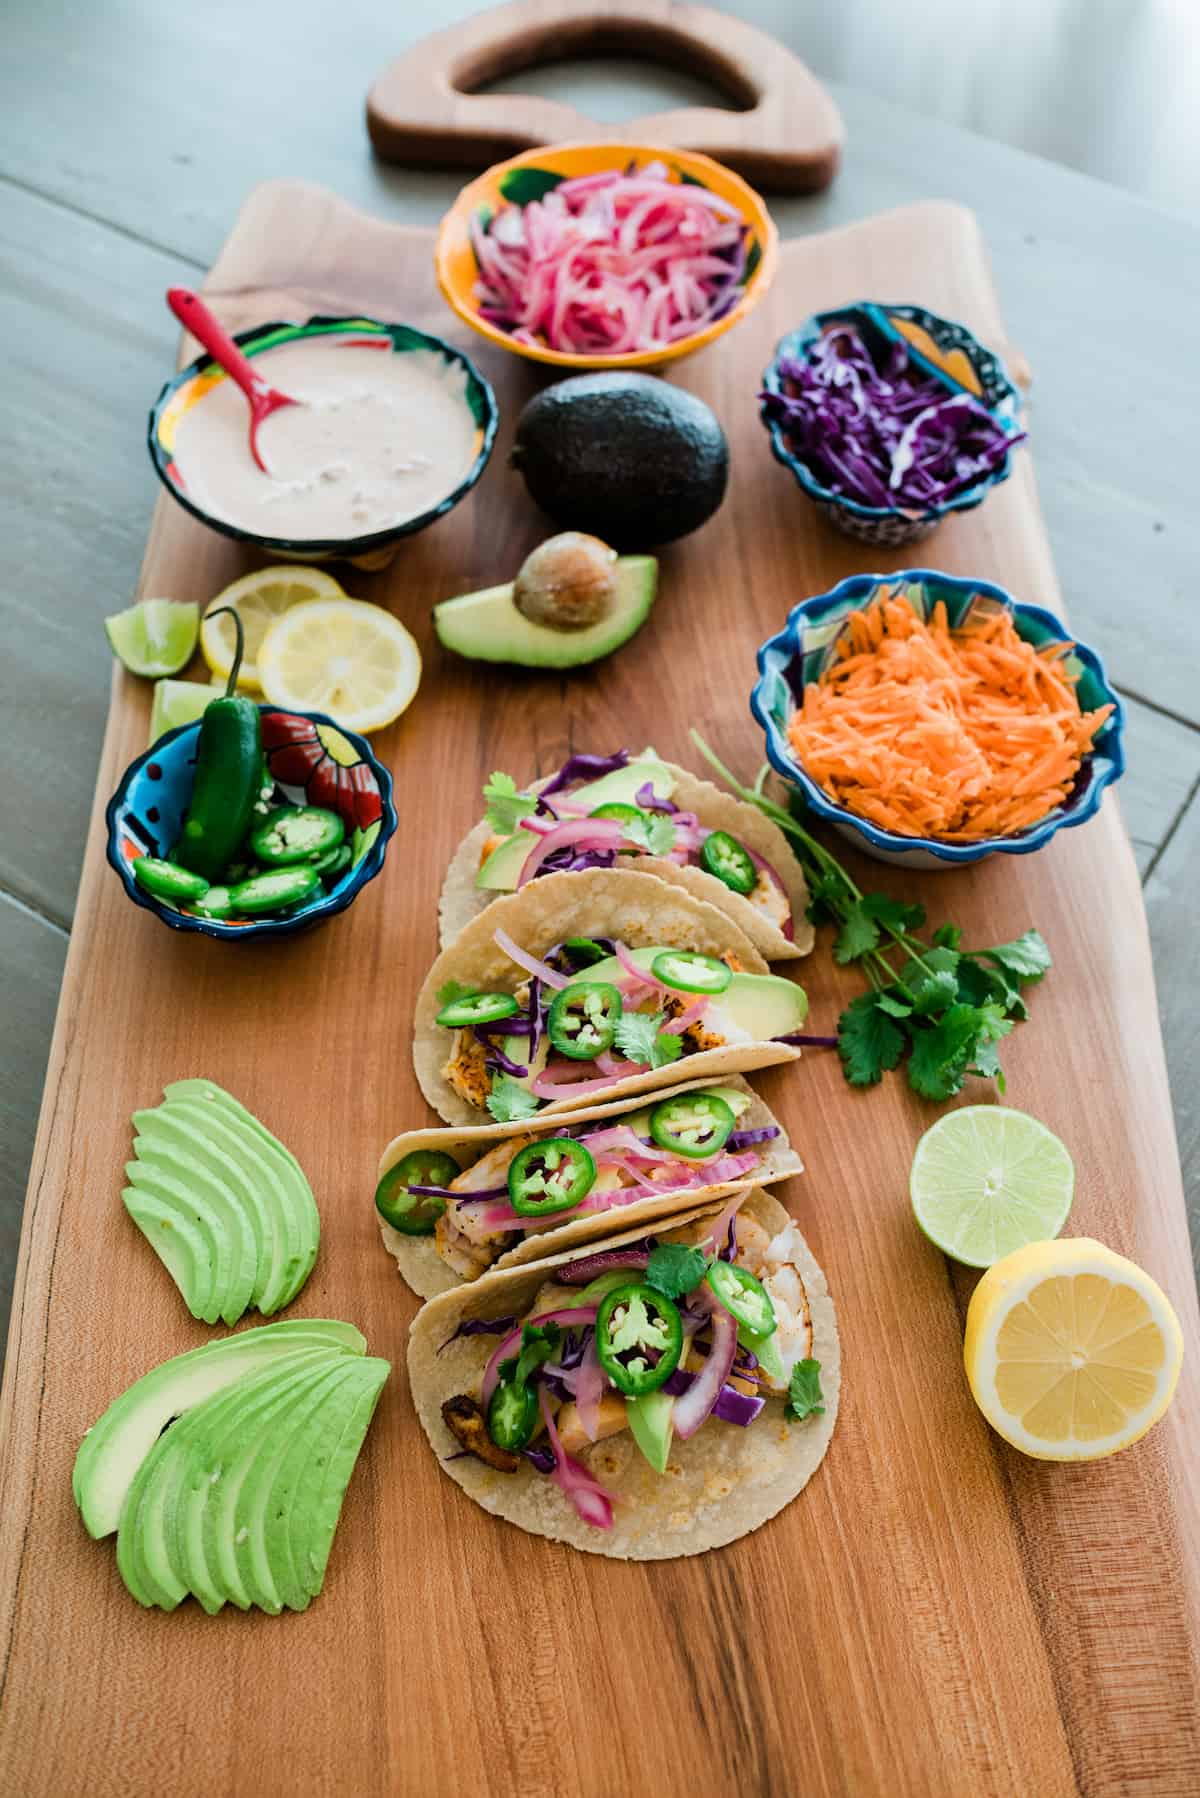 Taco party board with 4 assembled tilapia fish tacos and plenty of delicious sides and toppings to choose from.